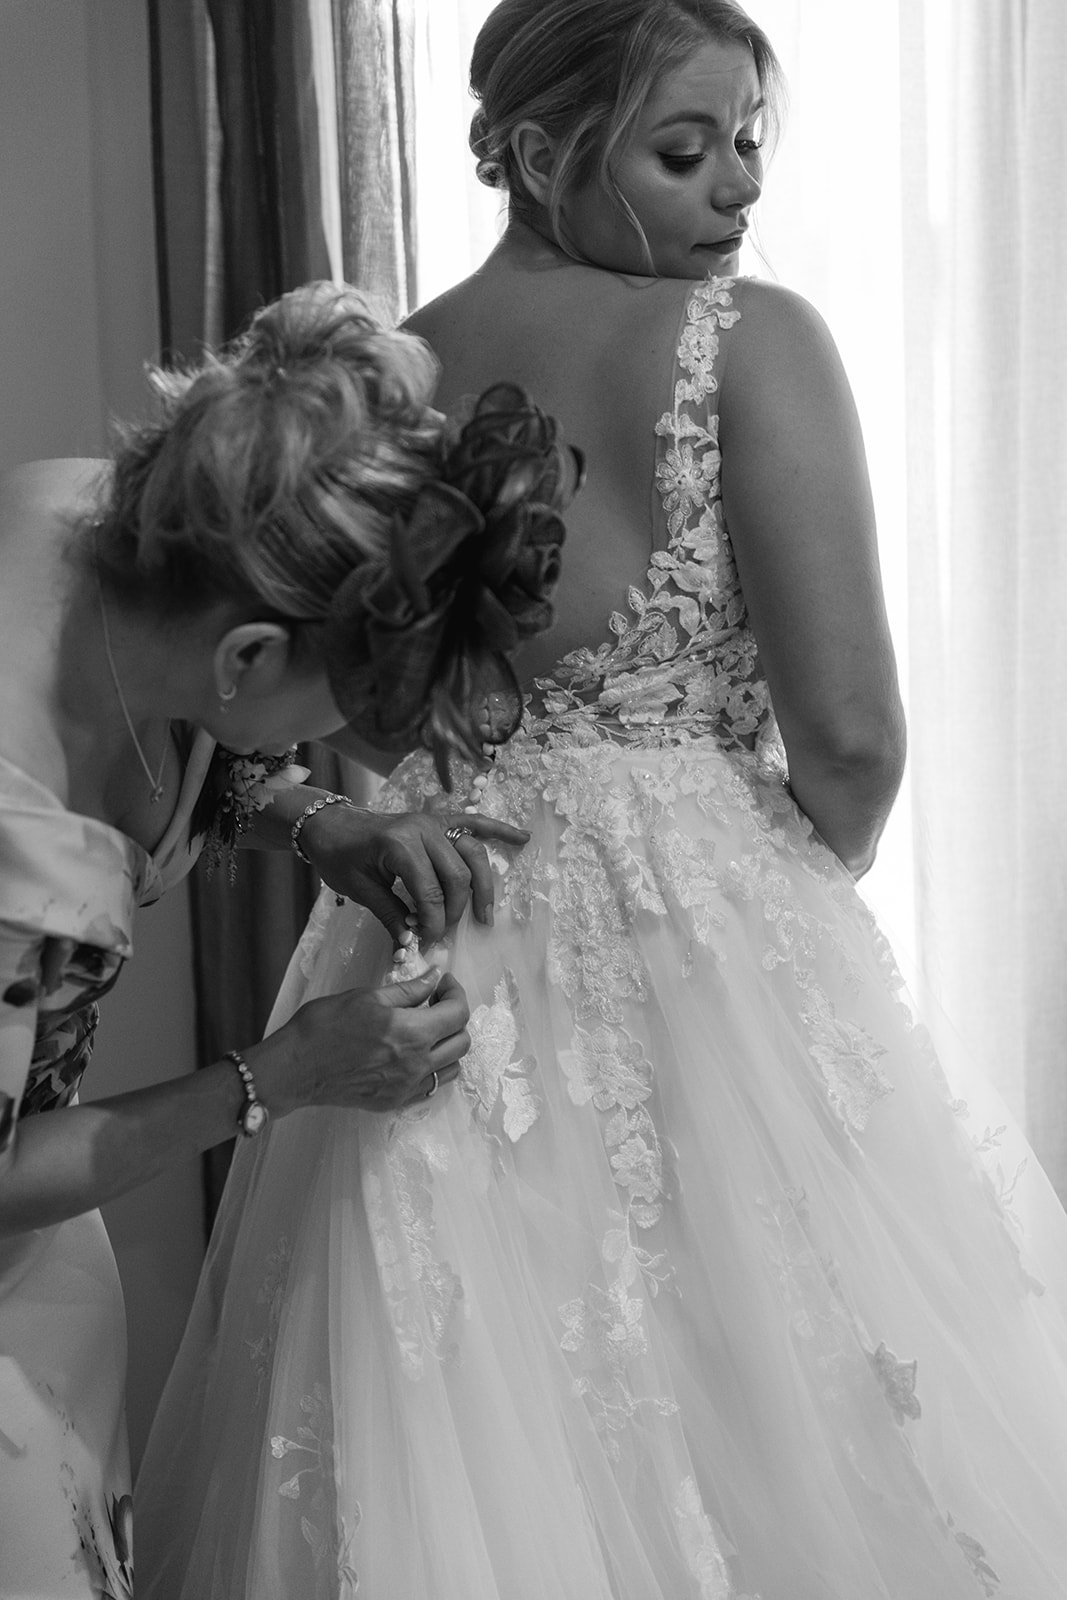 Bride getting into her dress at a wedding at Long Furlong Barn, Sussex. By OliveJoy Photography.